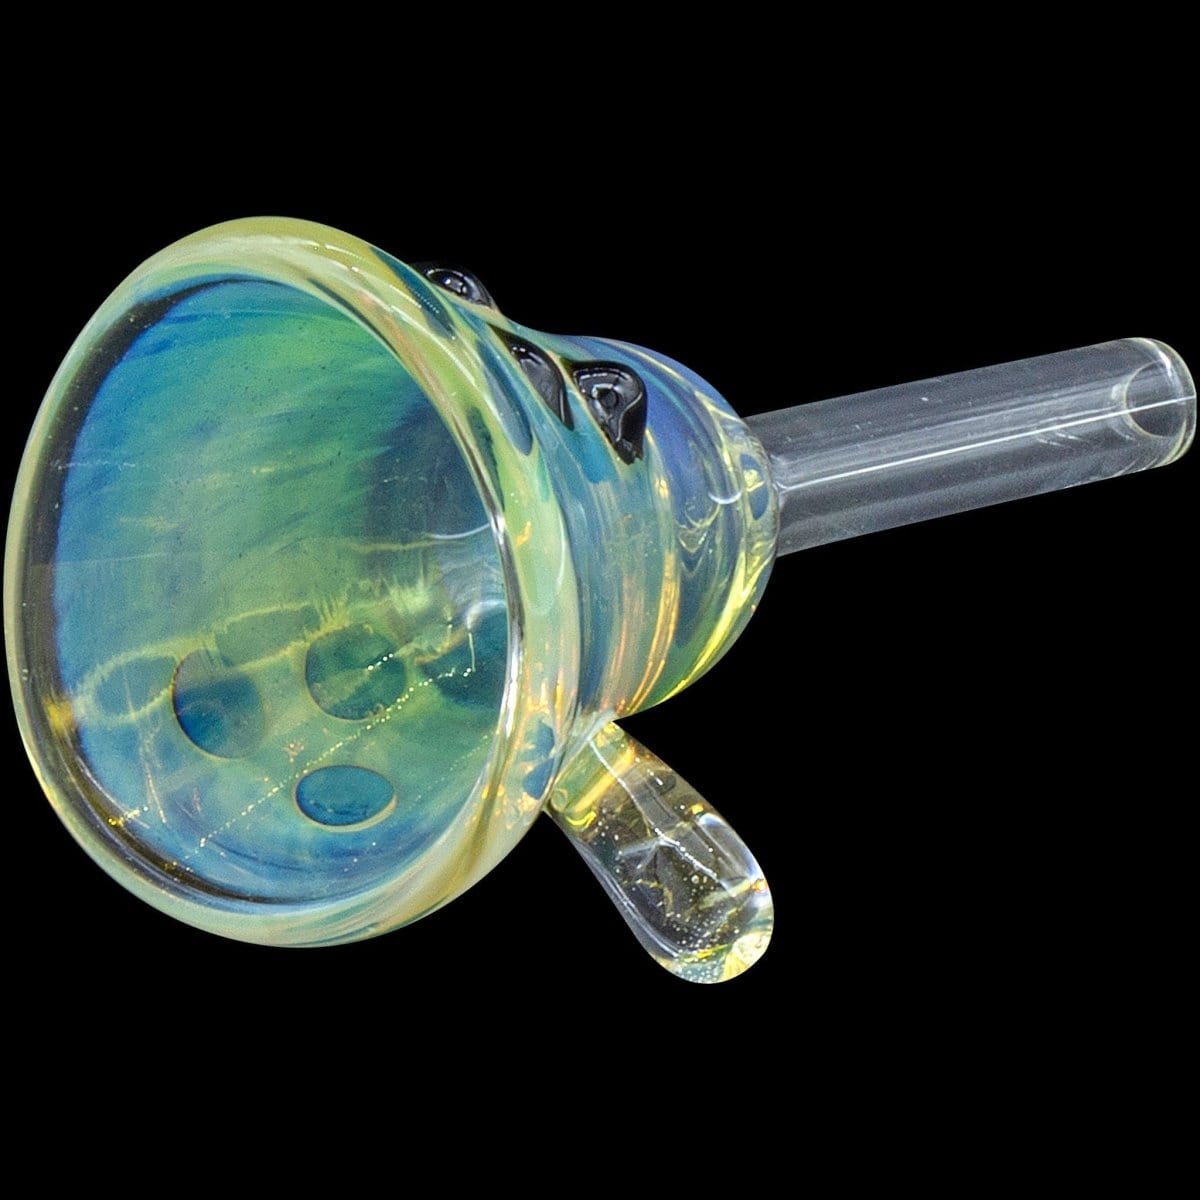 LA Pipes Smoking Accessory Blue "Mission Bell" Pull-Stem Slide Bowl